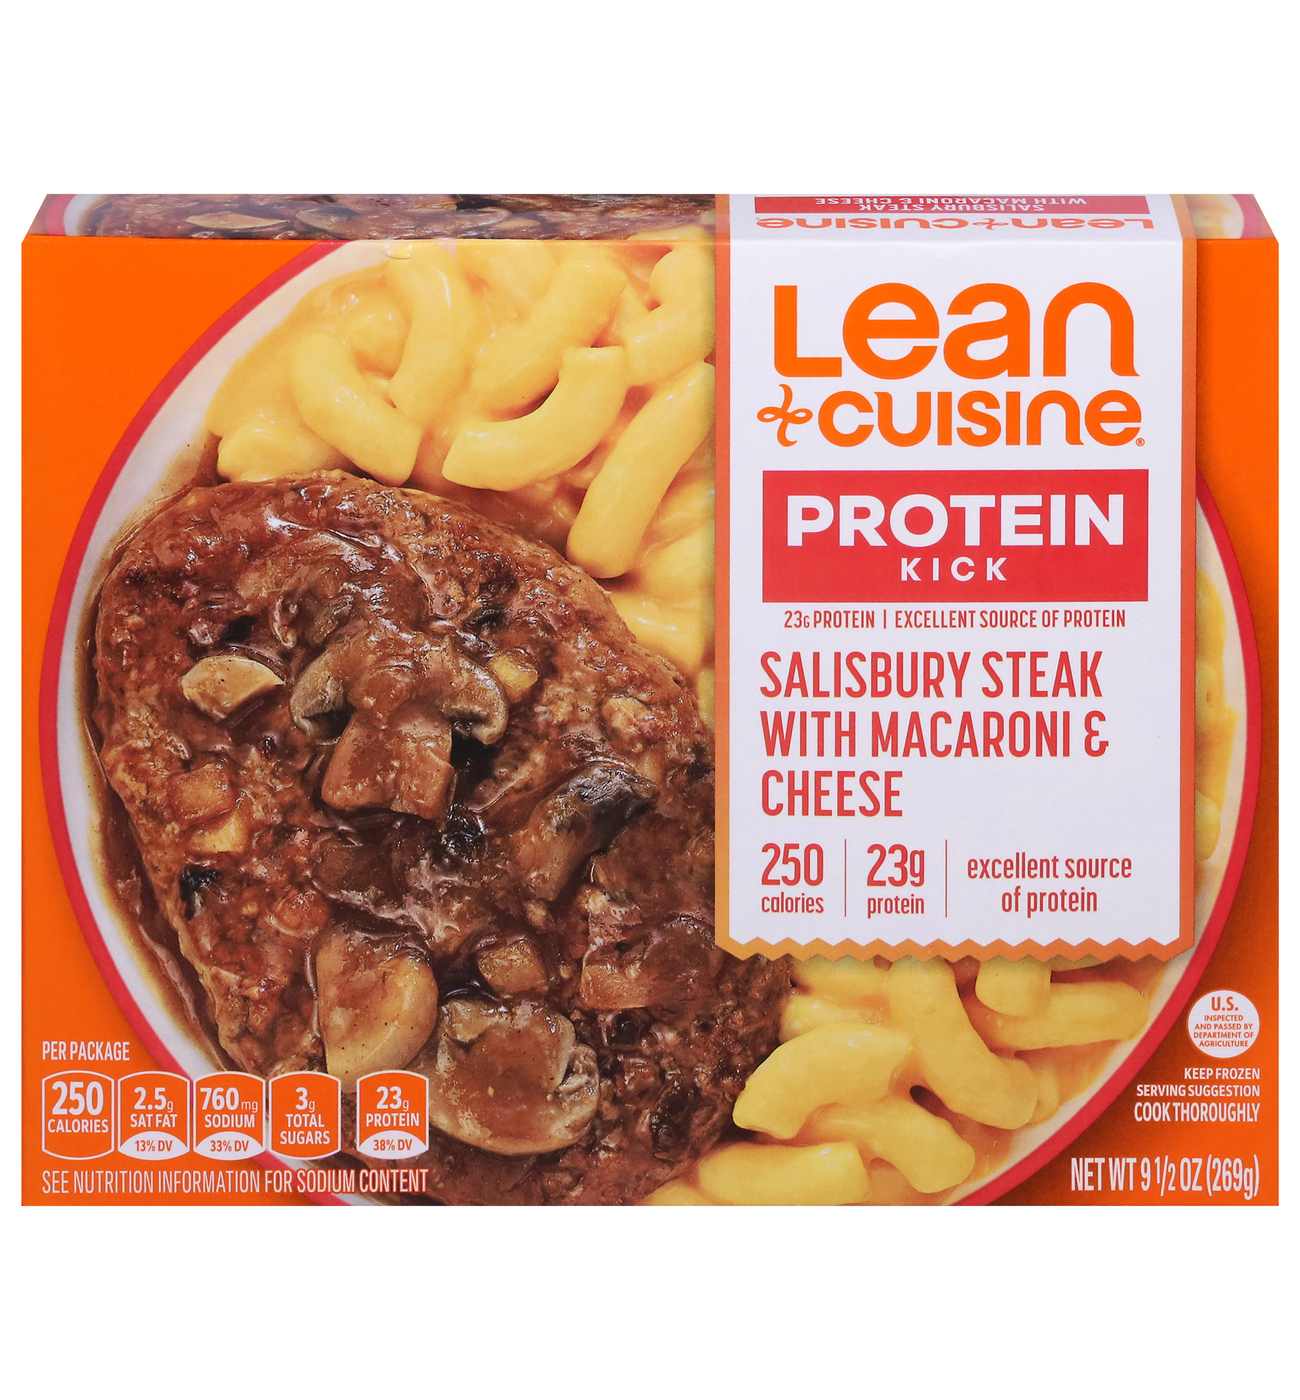 Lean Cuisine 23g Protein Salisbury Steak with Mac & Cheese Frozen Meal; image 1 of 4